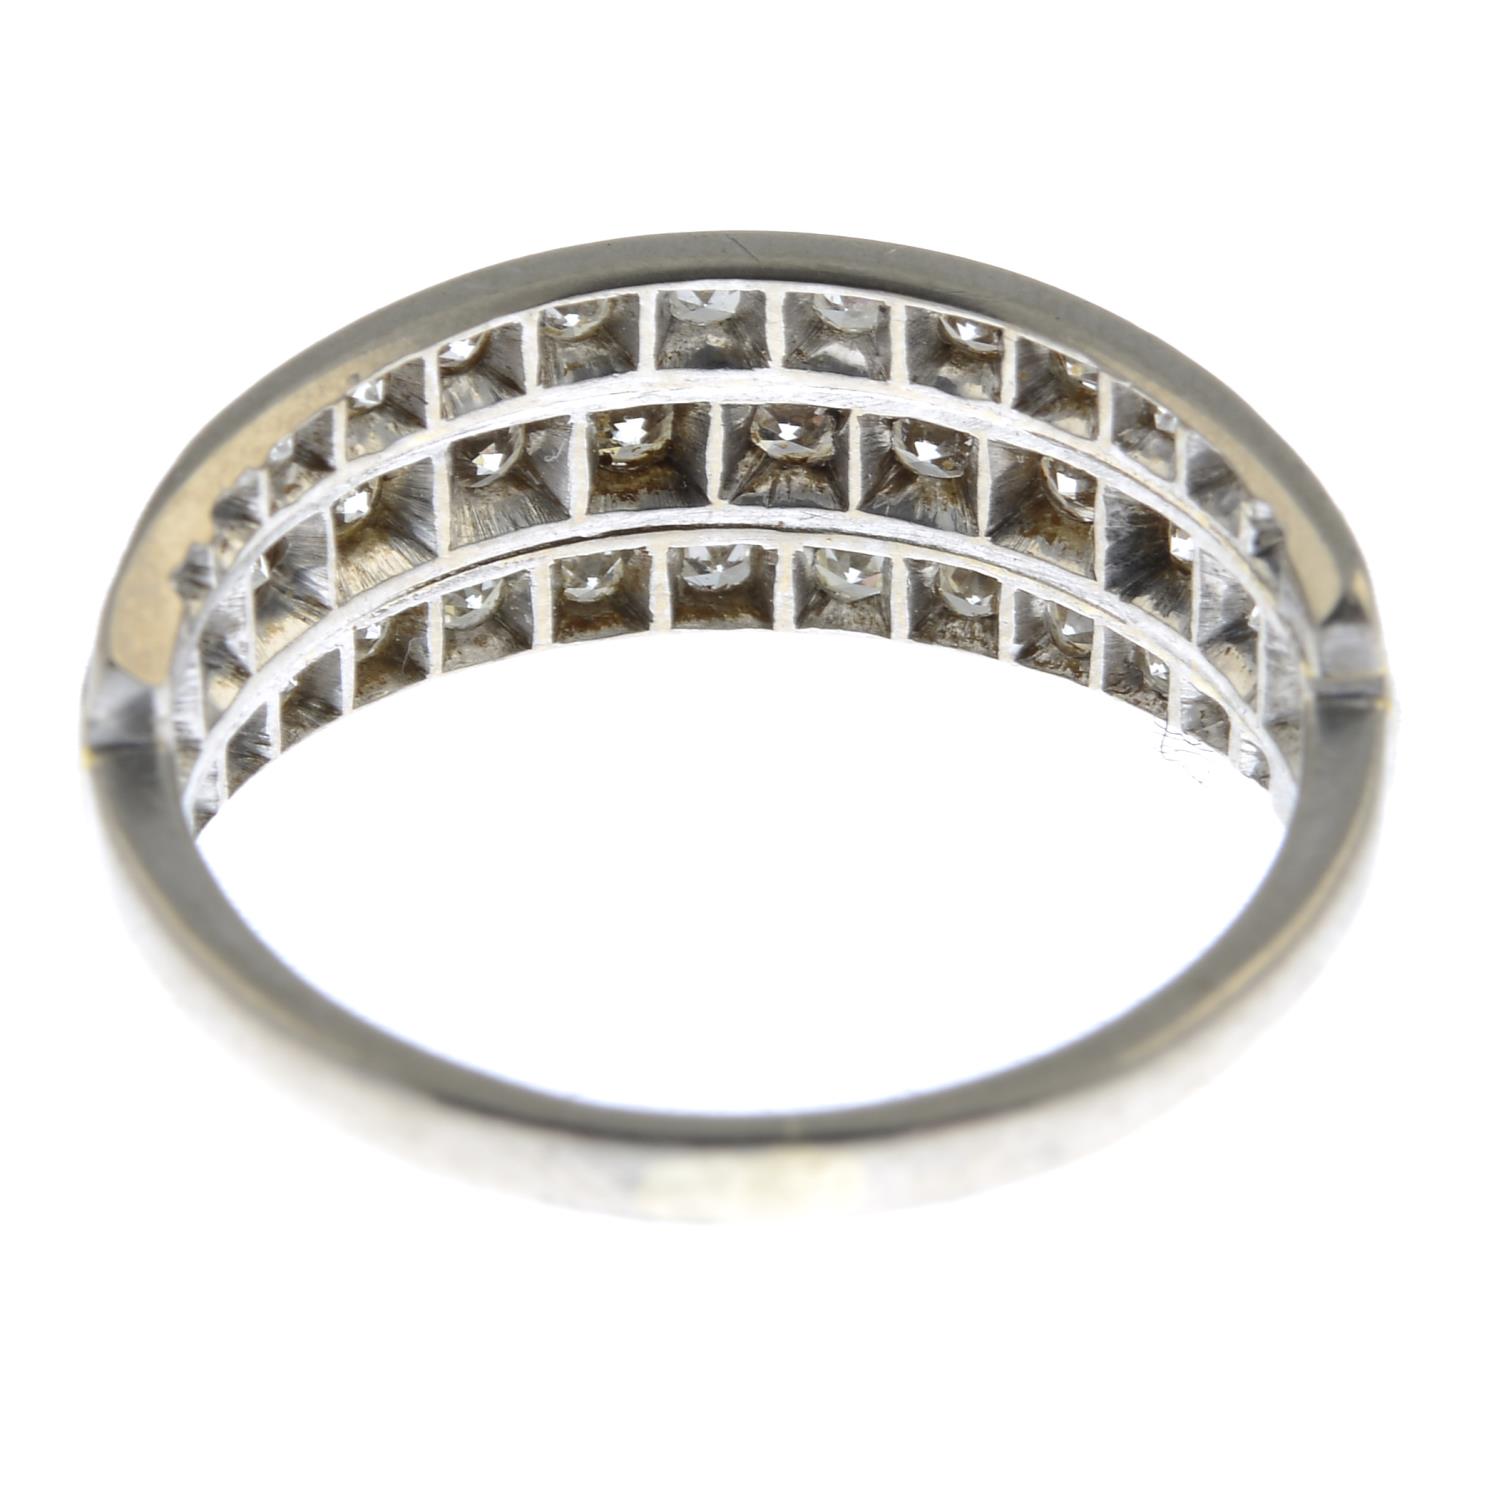 A mid 20th century brilliant-cut diamond ring,Estimated total diamond weight 0.65ct.Ring size N. - Image 3 of 3